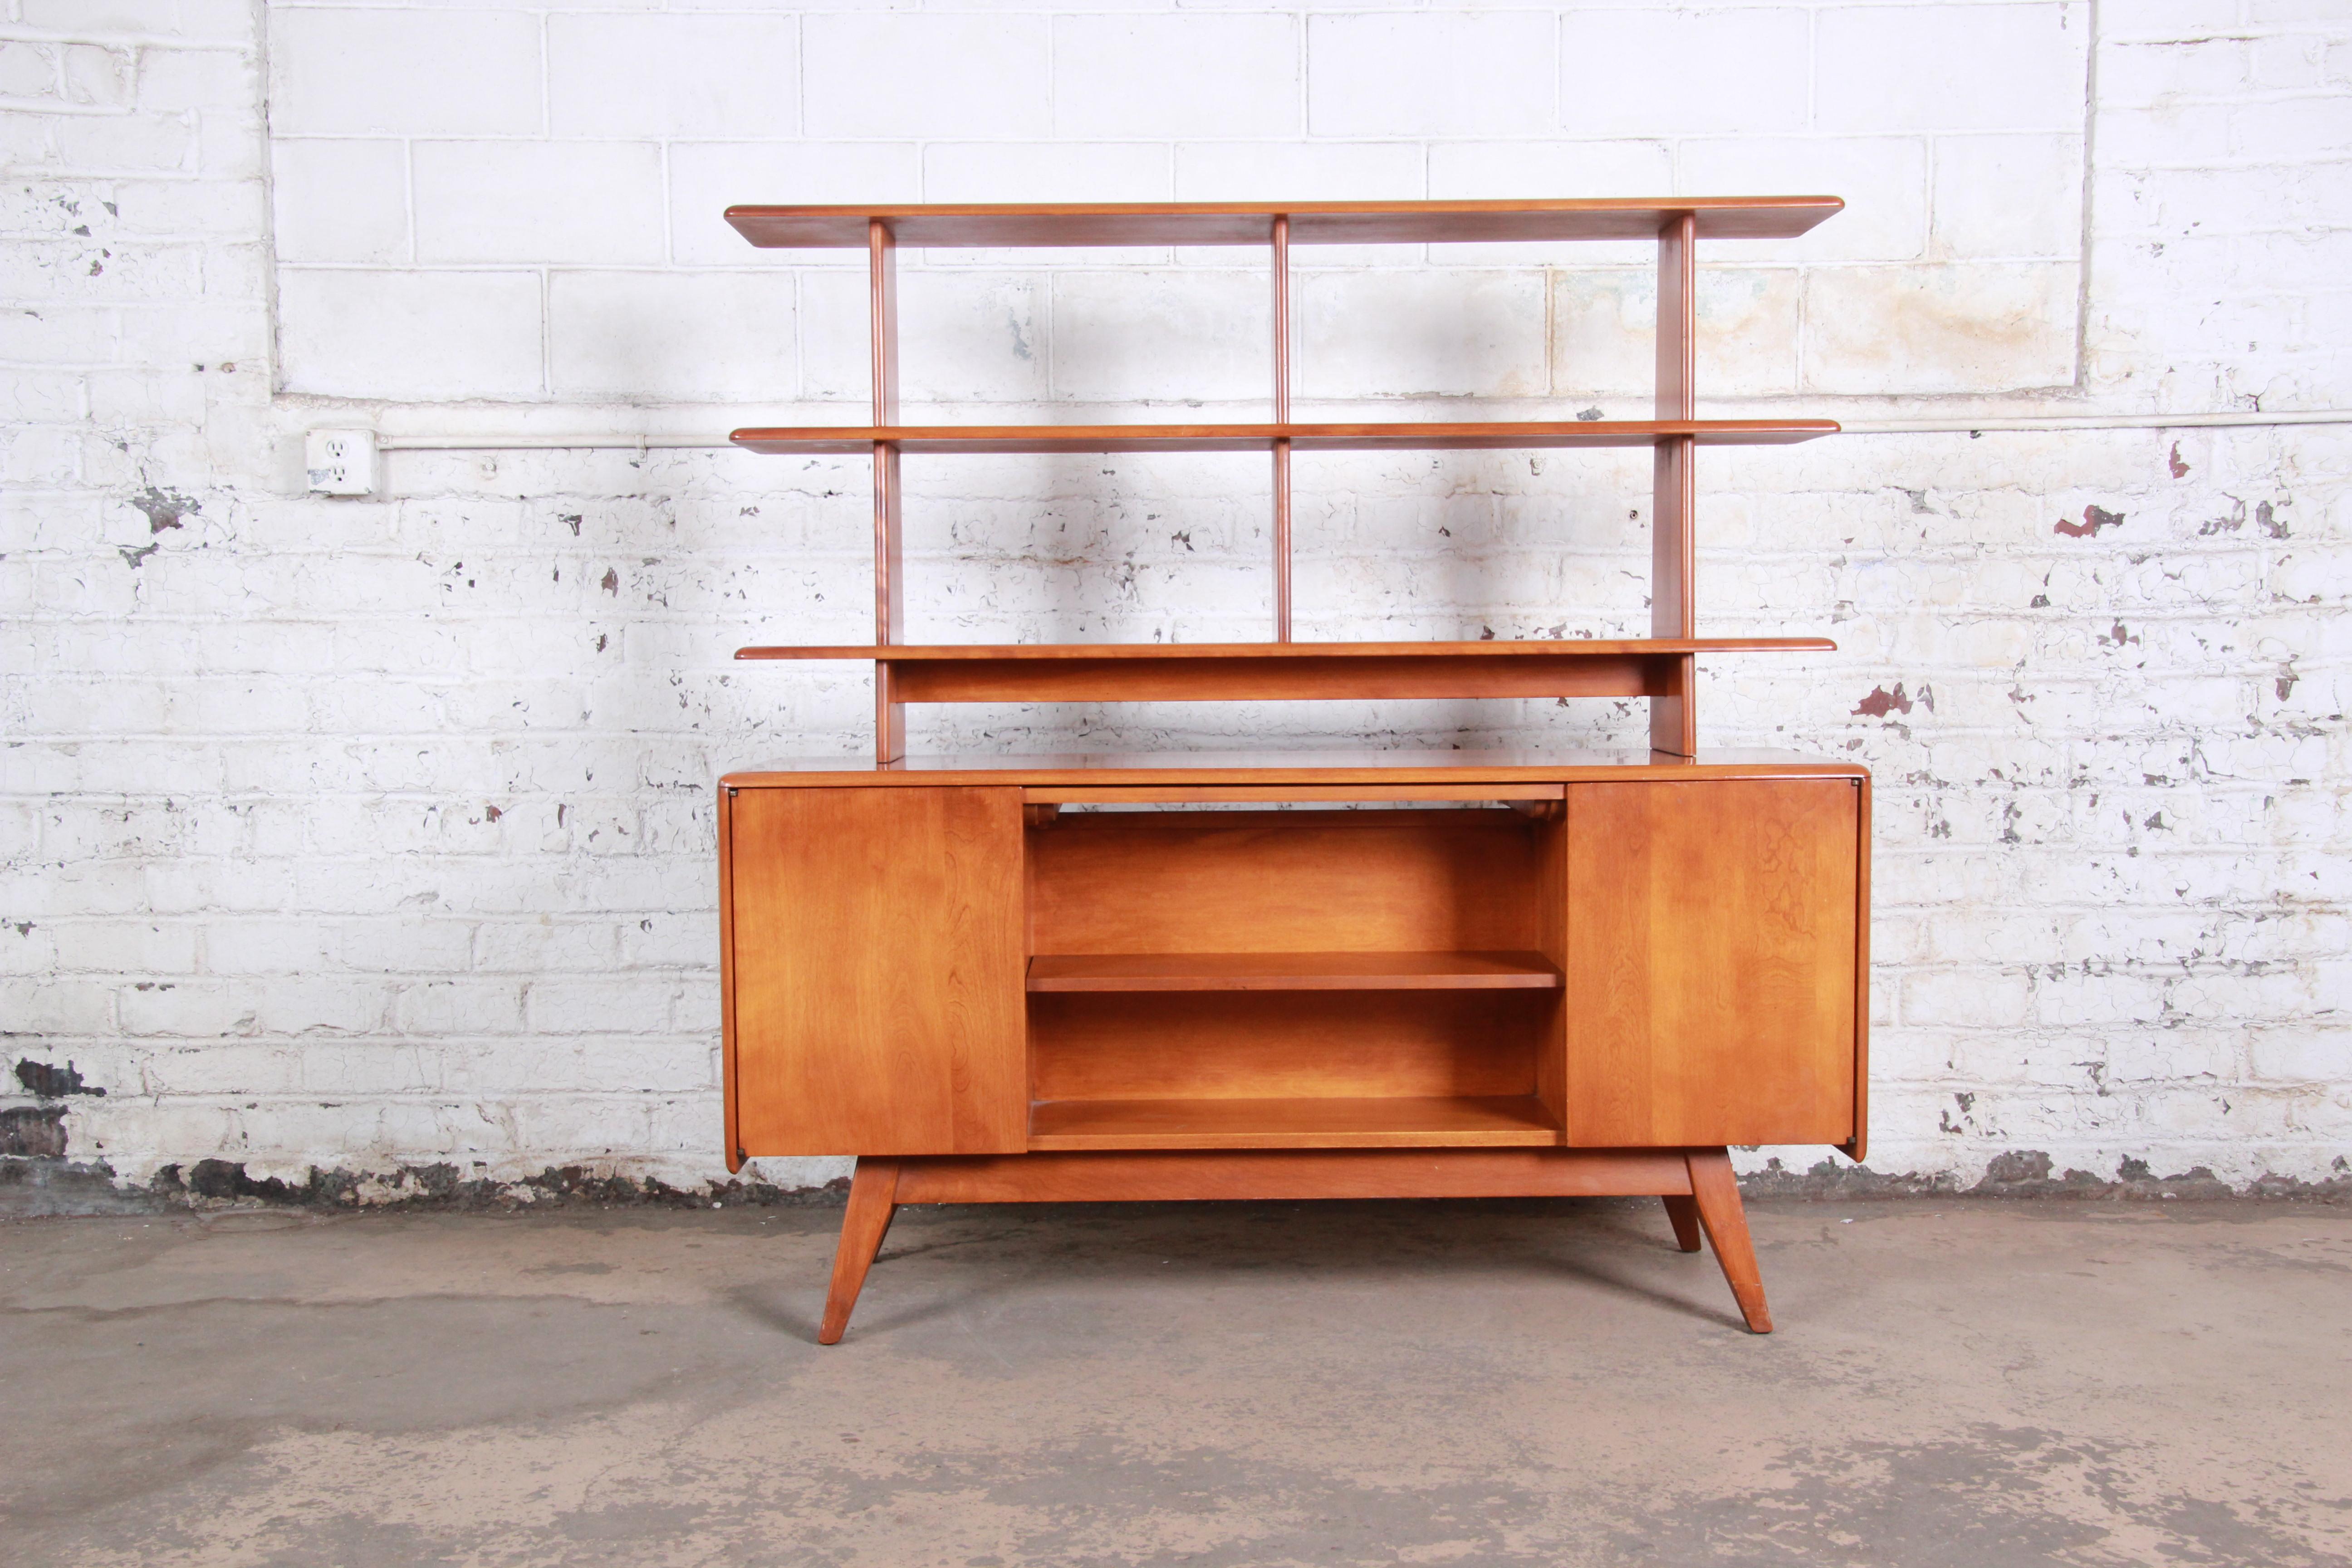 An extremely rare and exceptional Mid-Century Modern double sided room divider credenza by Heywood Wakefield. The room divider features solid maple construction and sleek midcentury lines. It offers ample storage, with two shelved cabinets and open